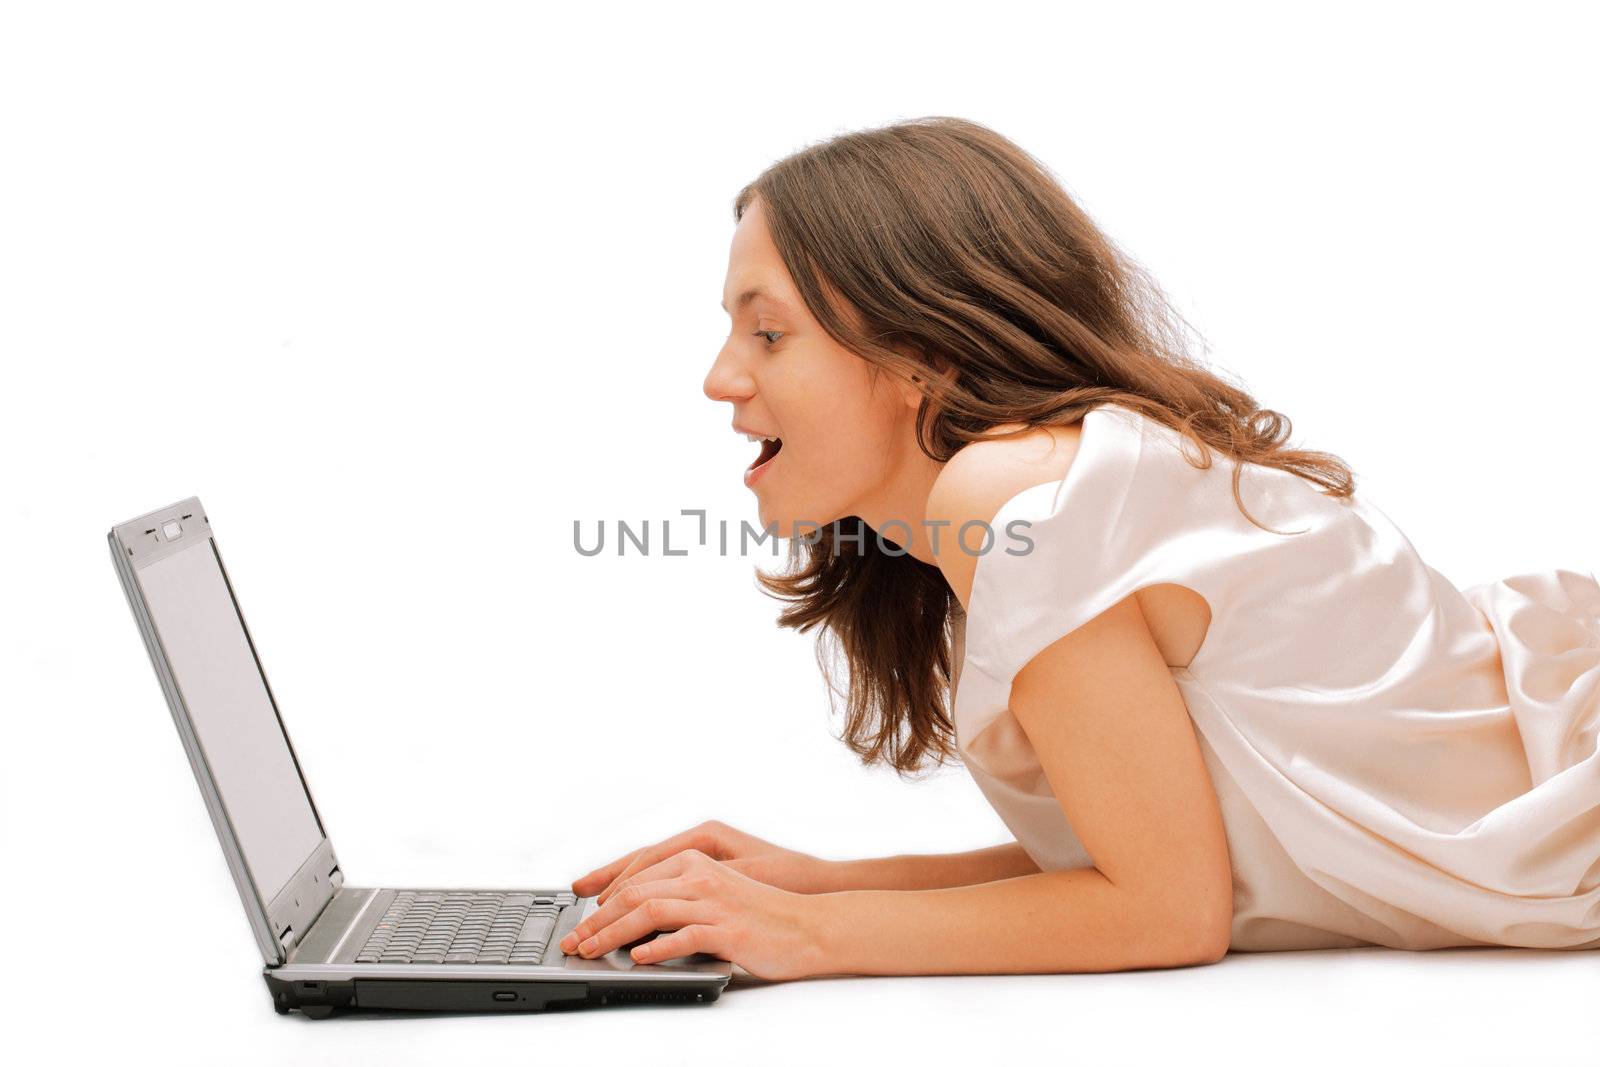 Profile view of a happy young female using a laptop over white background